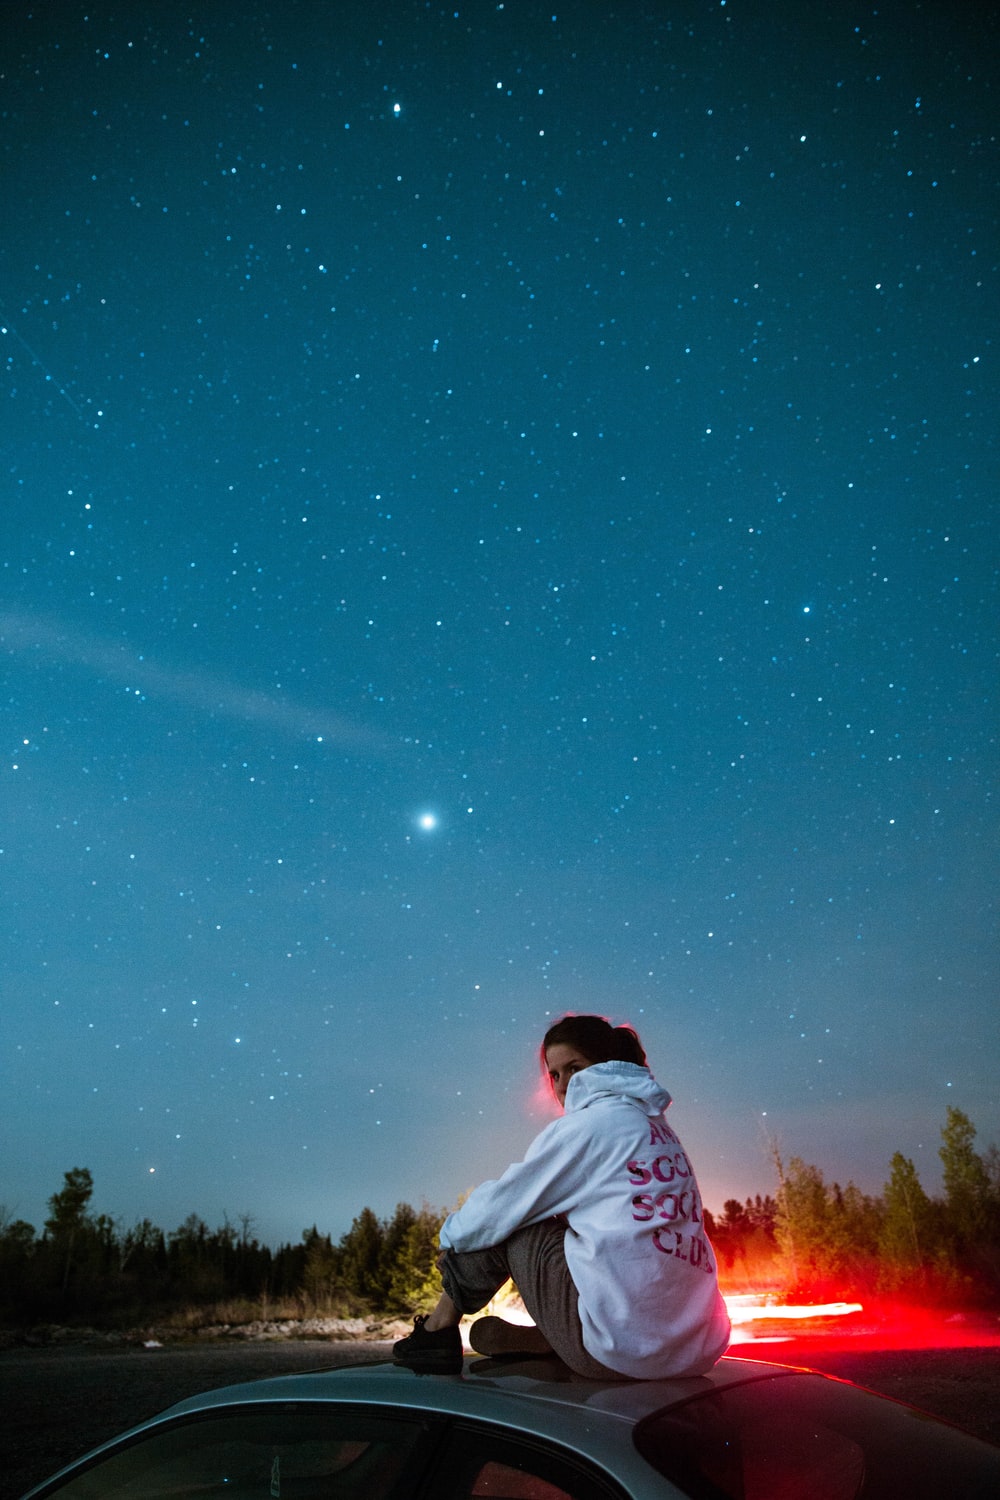 Night Sky Woman Picture. Download Free Image